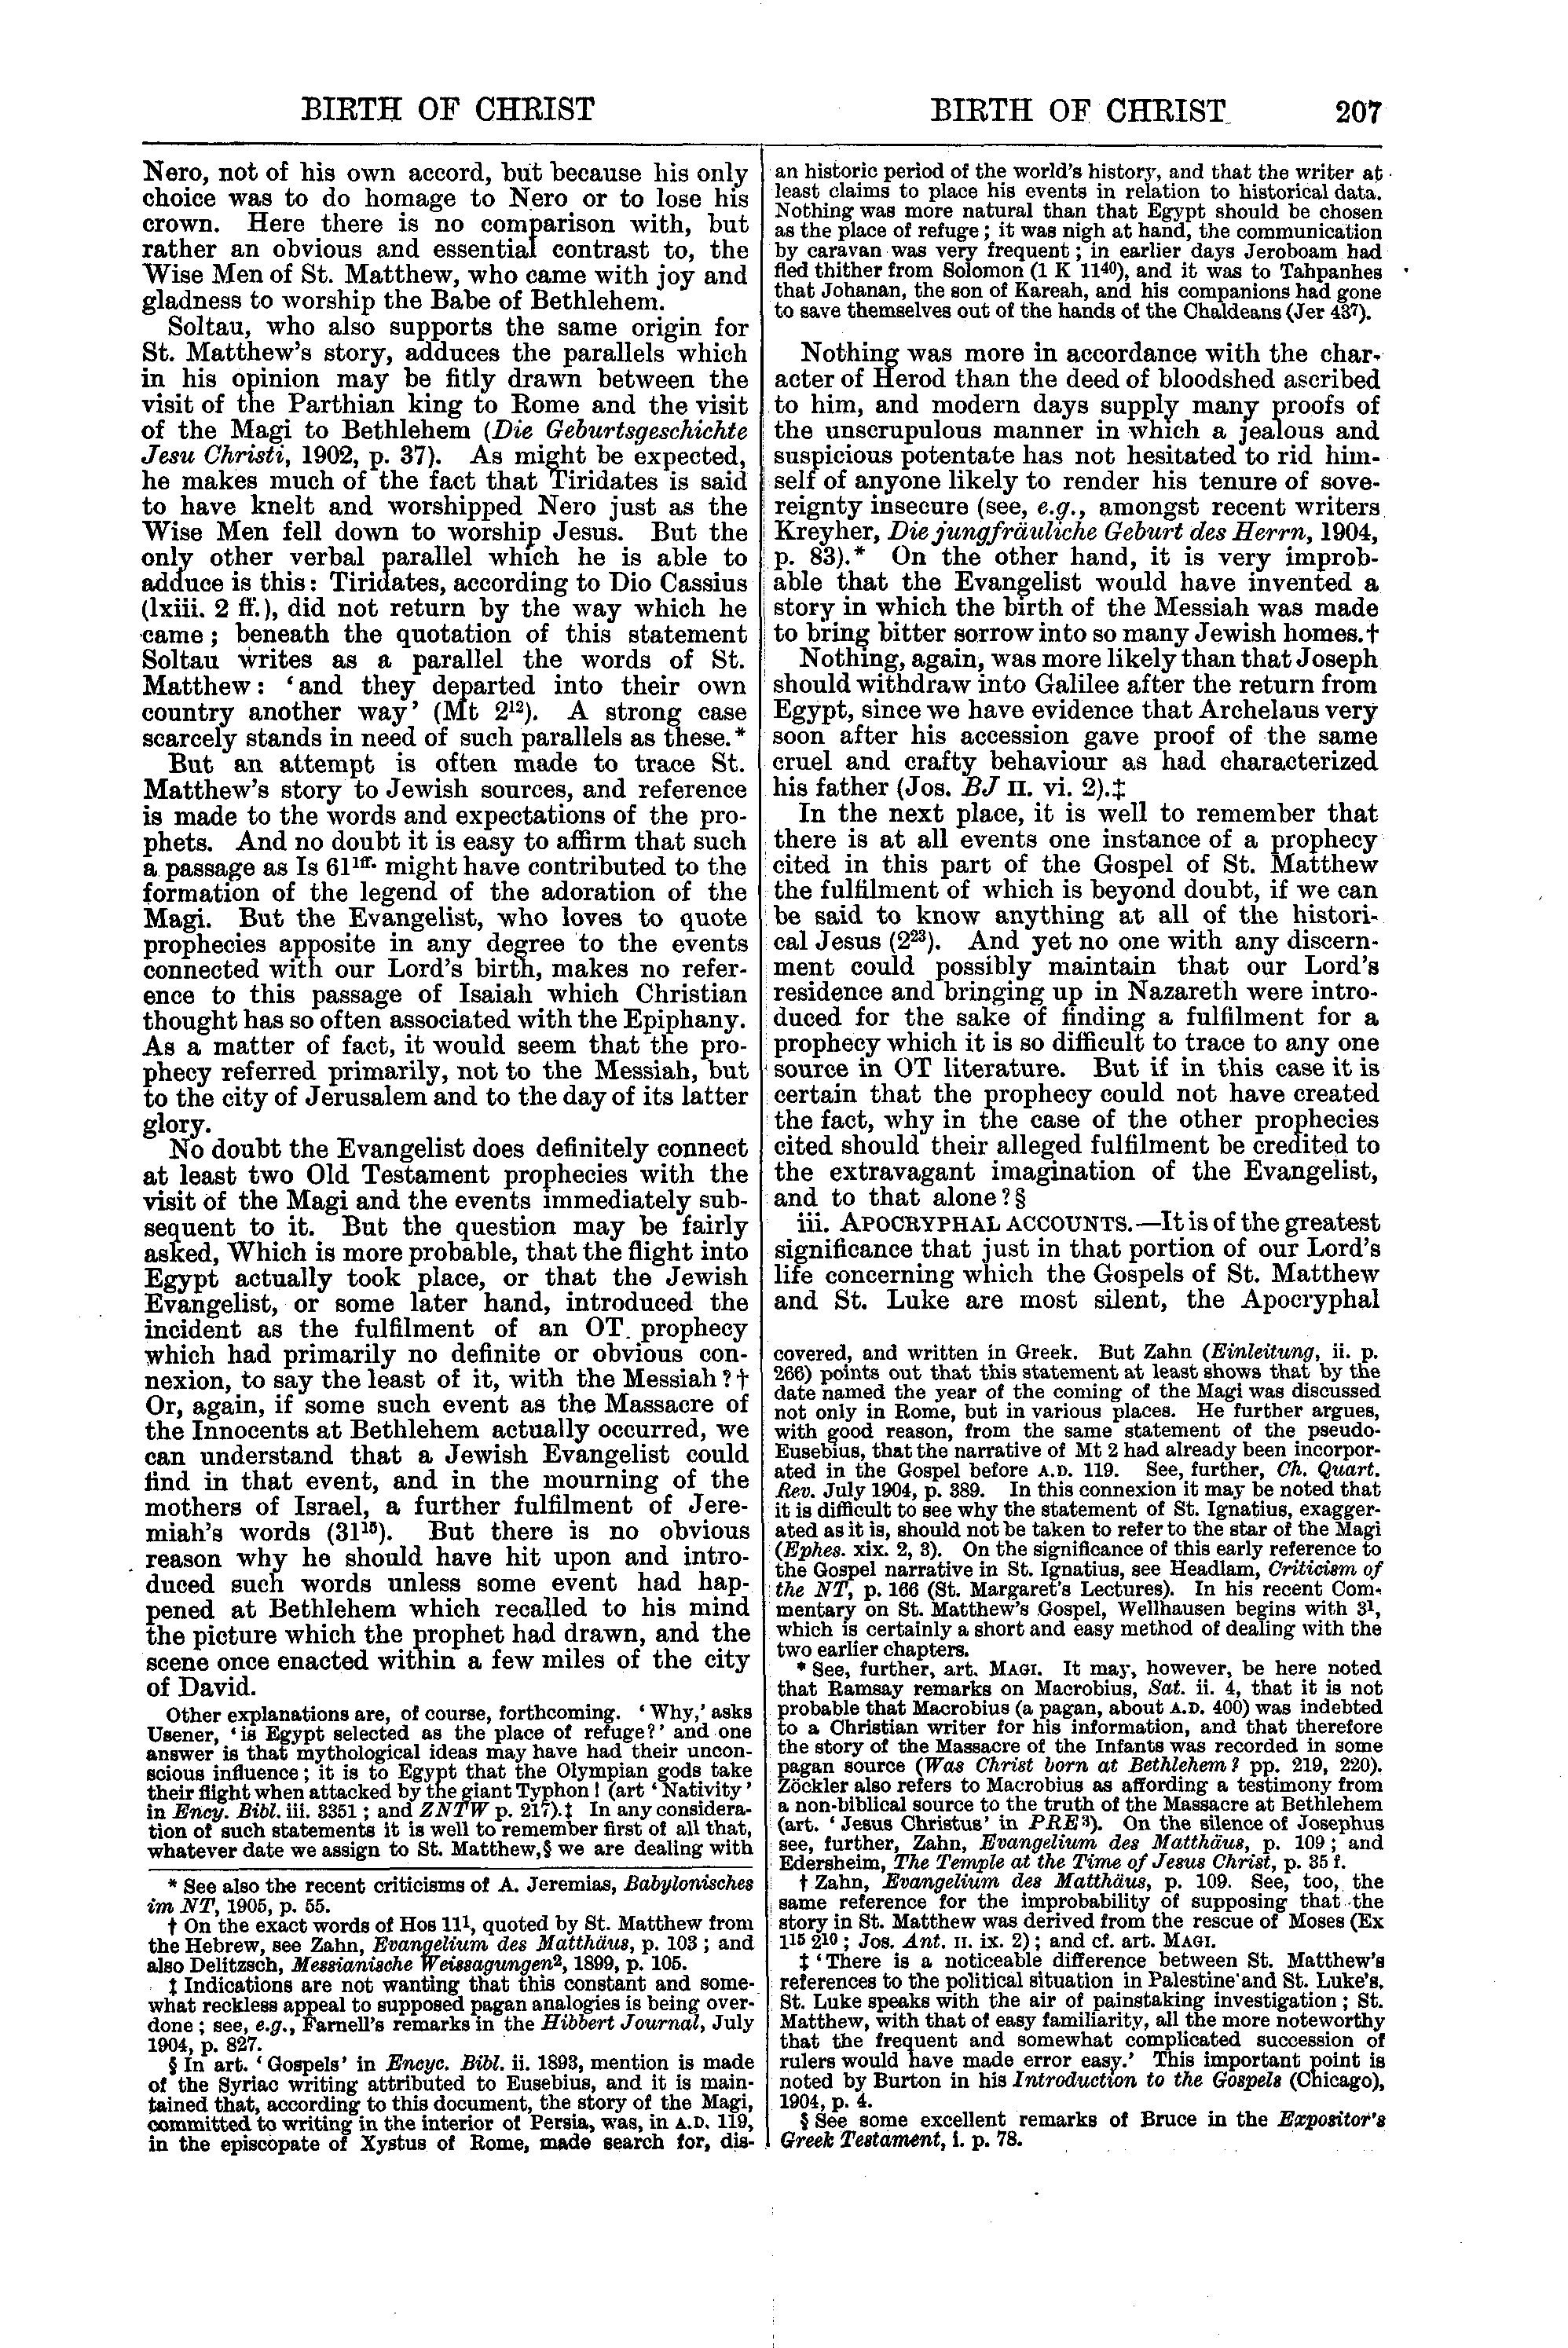 Image of page 207